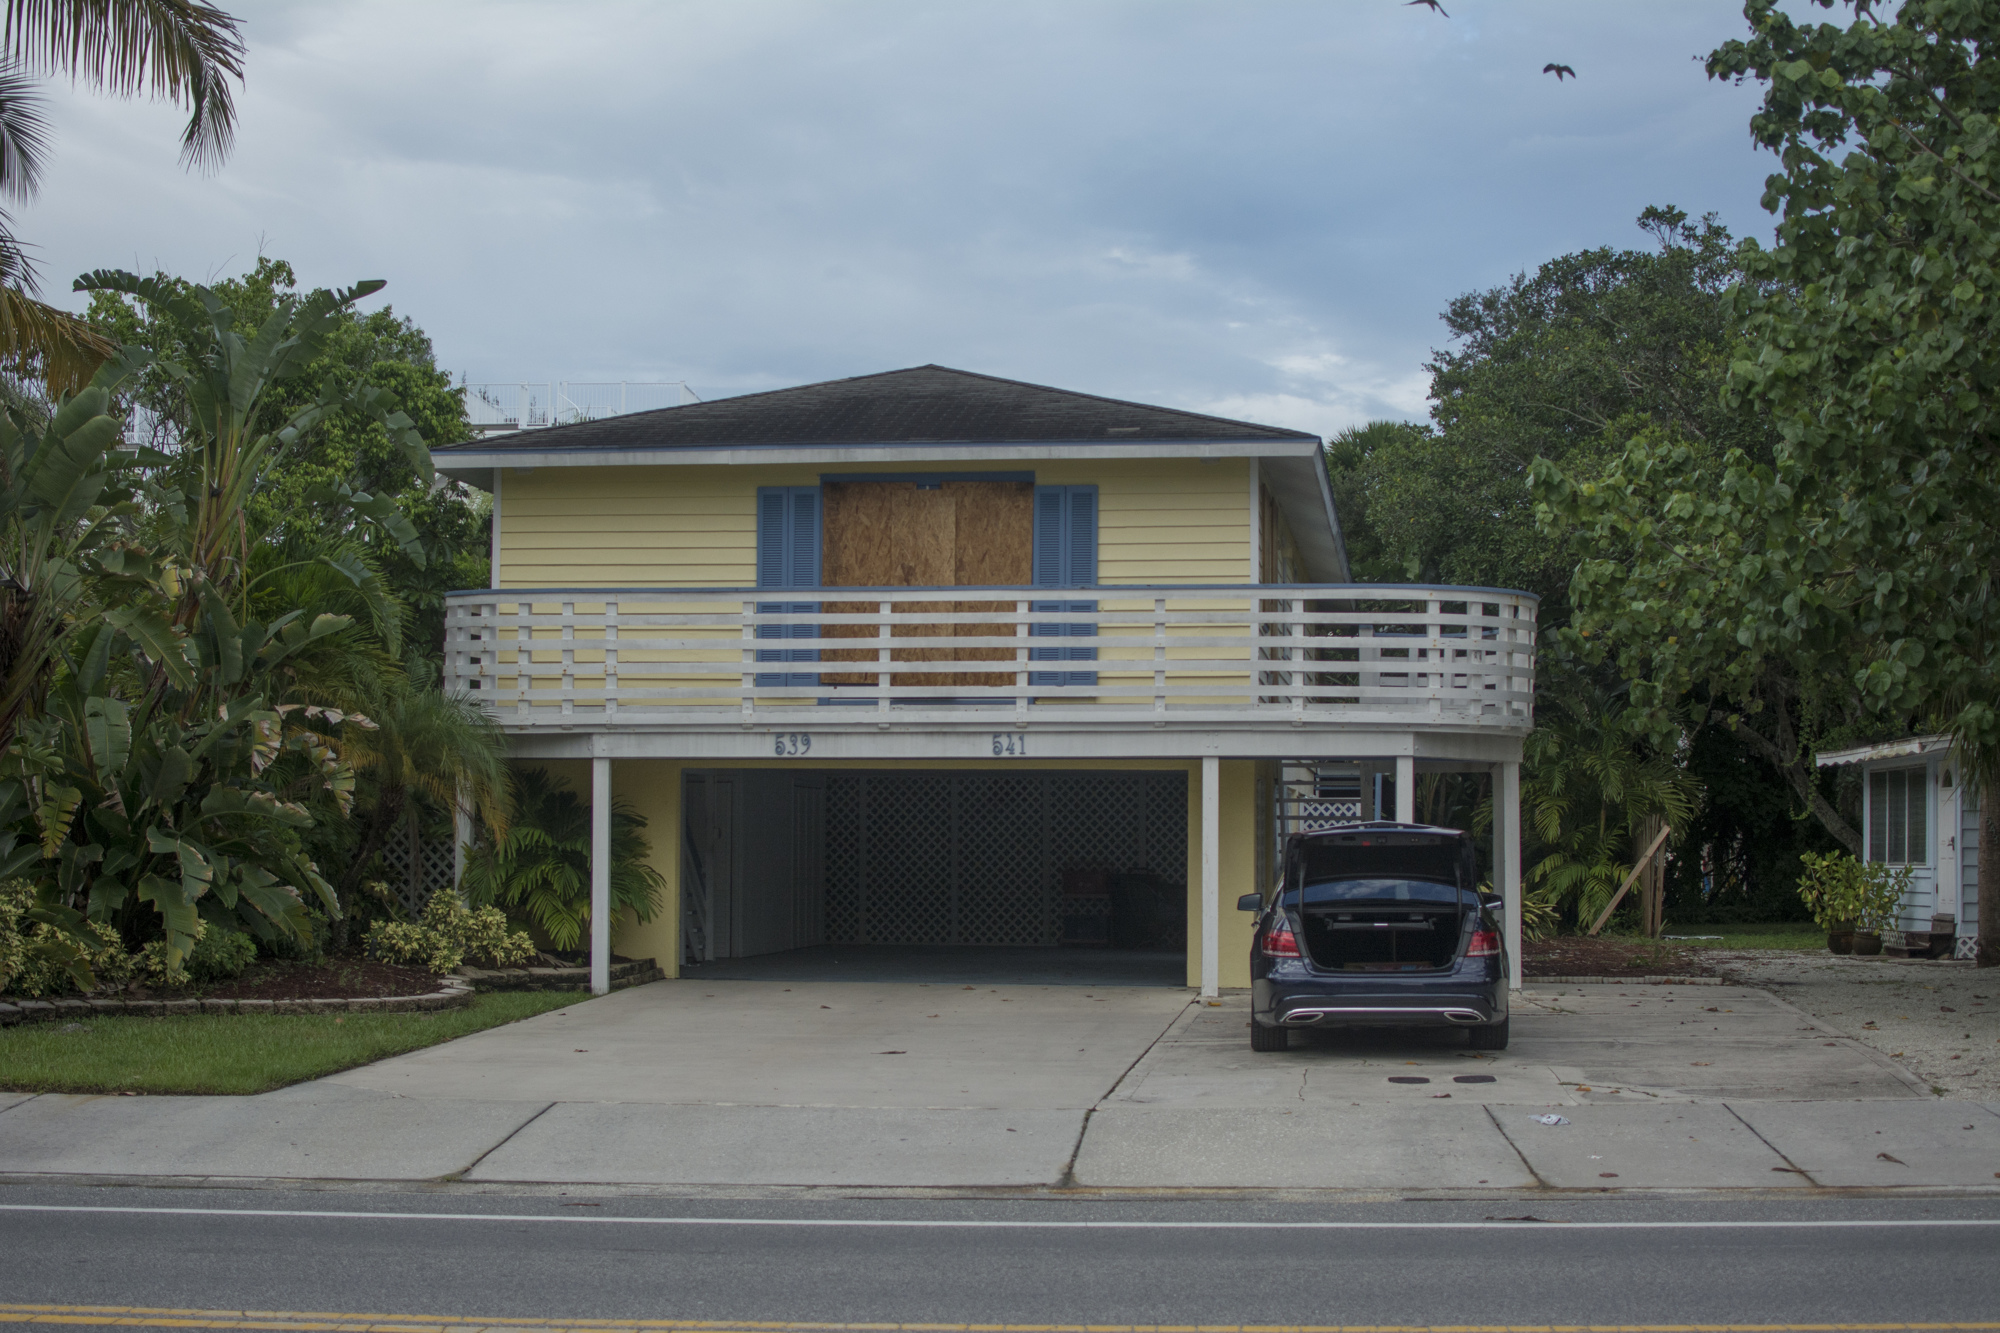 Eric Elliott's property on Beach Road is boarded up, but it's future is uncertain as Hurricane Irma approaches.